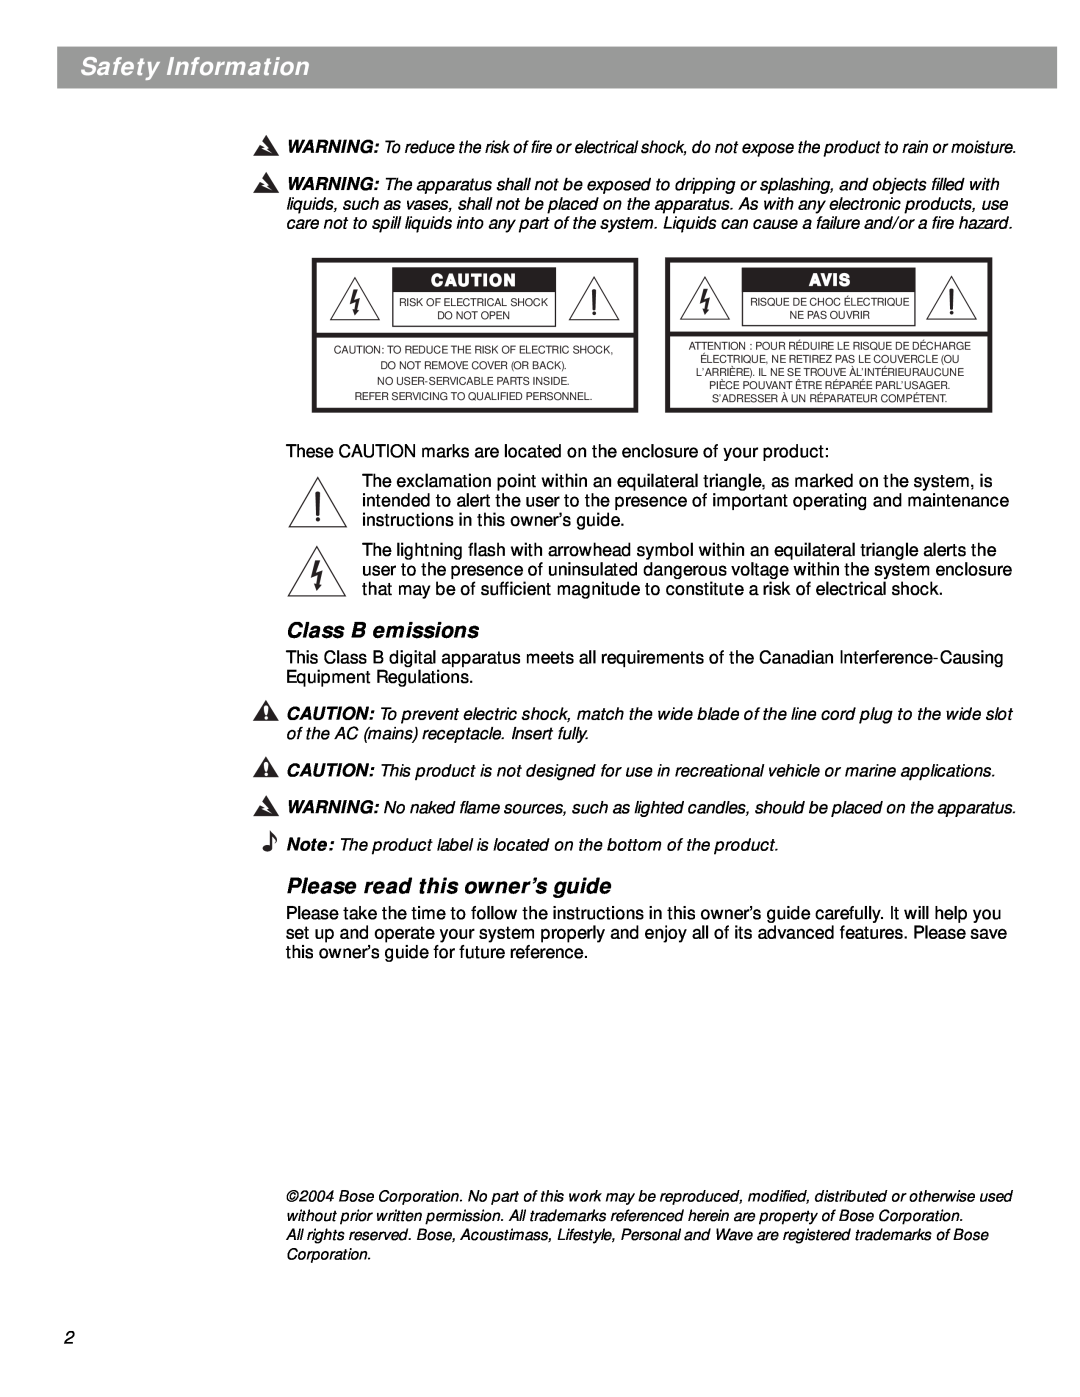 Bose SA-3 manual Safety Information, Class B emissions, Please read this owner’s guide, Avis 